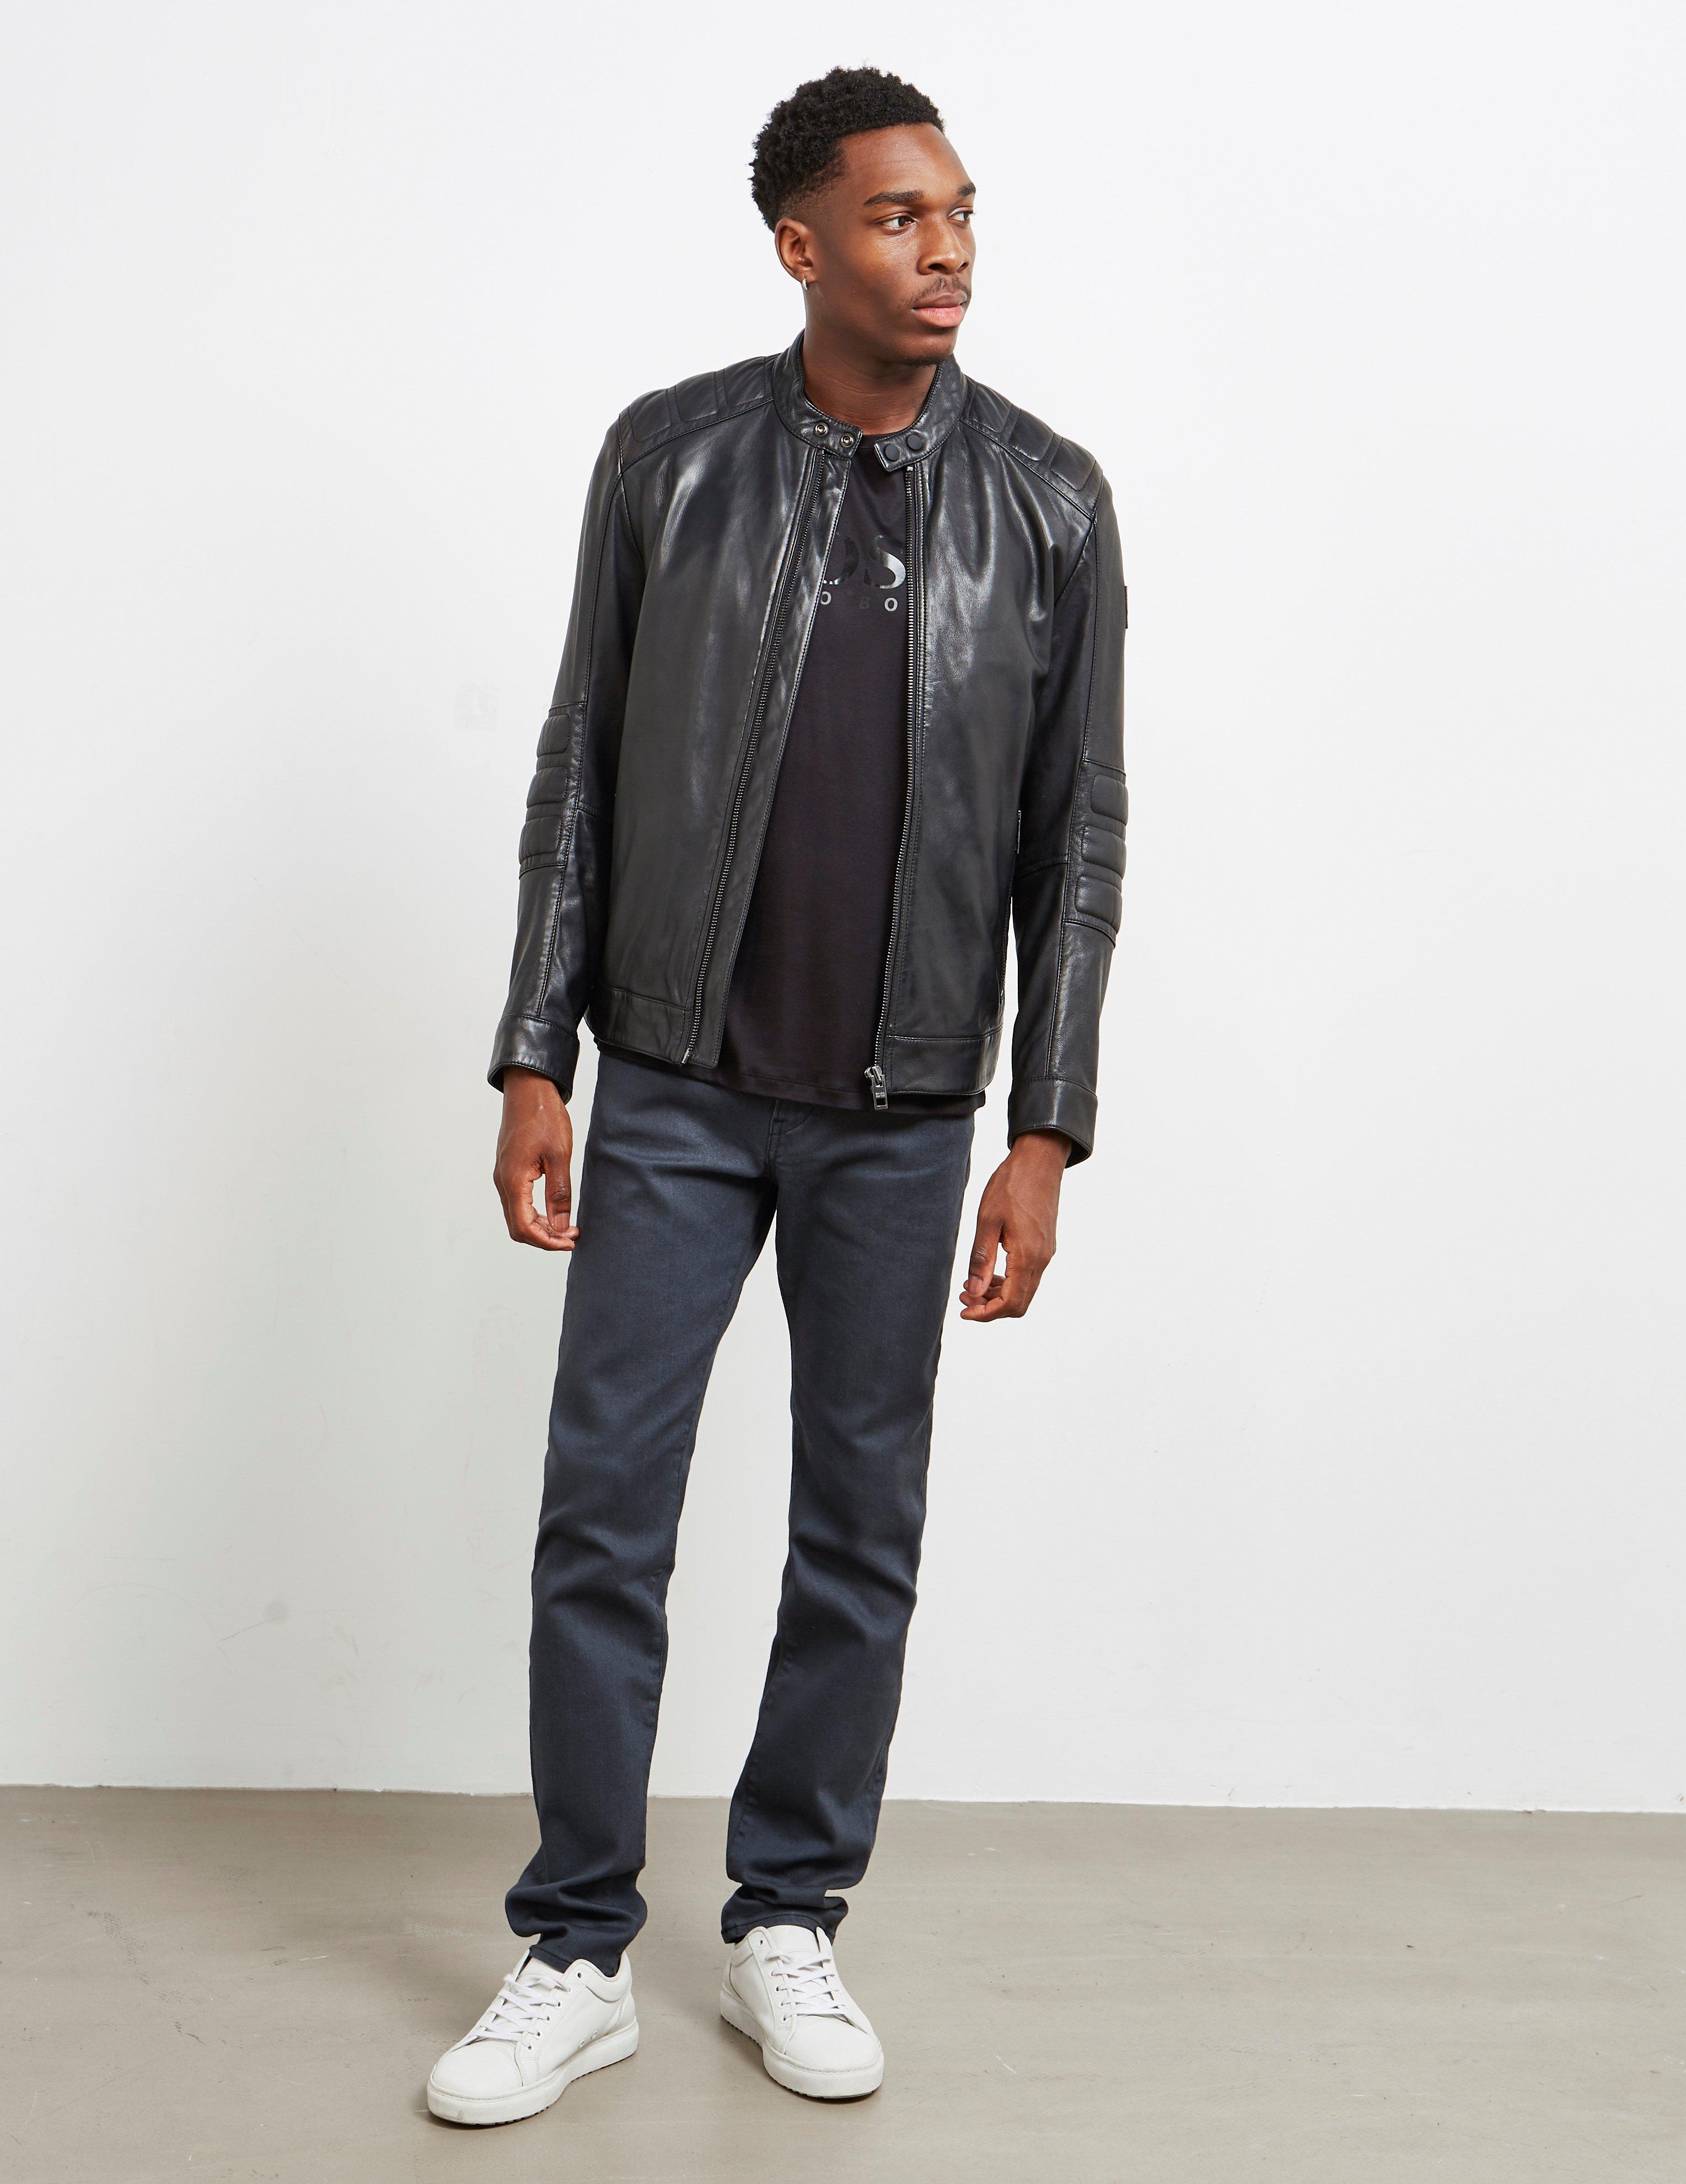 boss jagson leather jacket Cheaper Than Retail Price> Buy Clothing,  Accessories and lifestyle products for women & men -